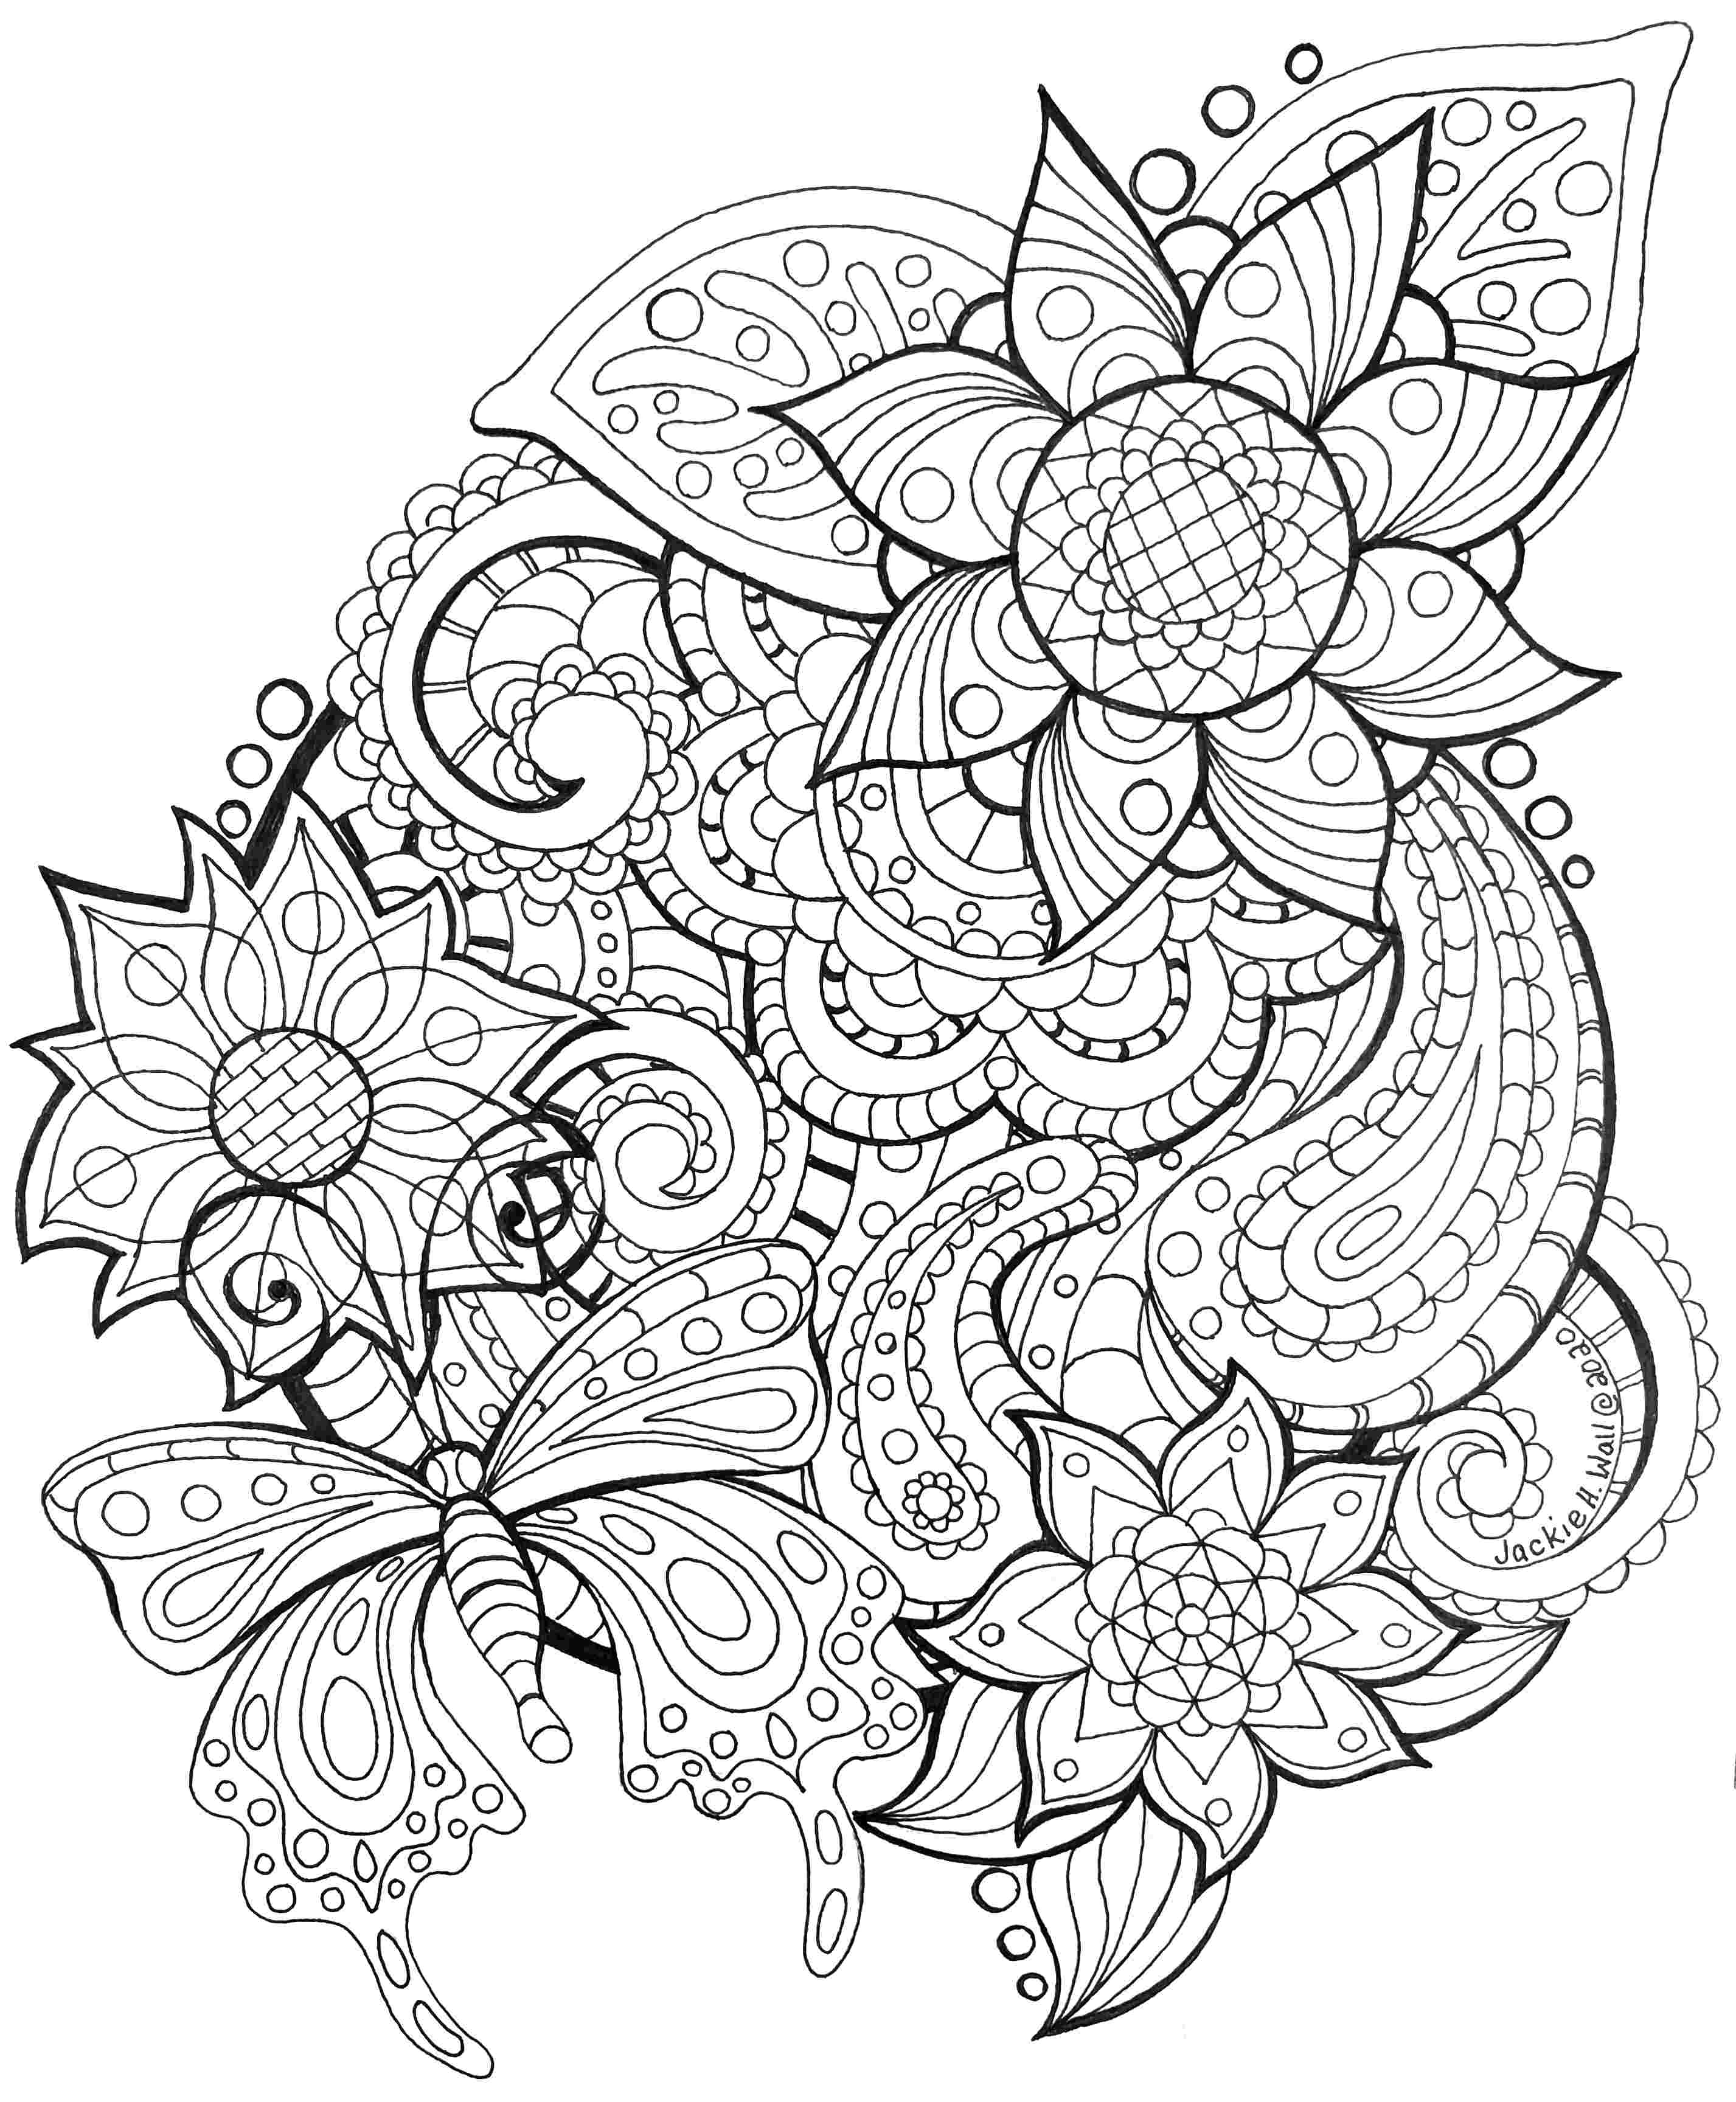 Floral Dream Colouring Page